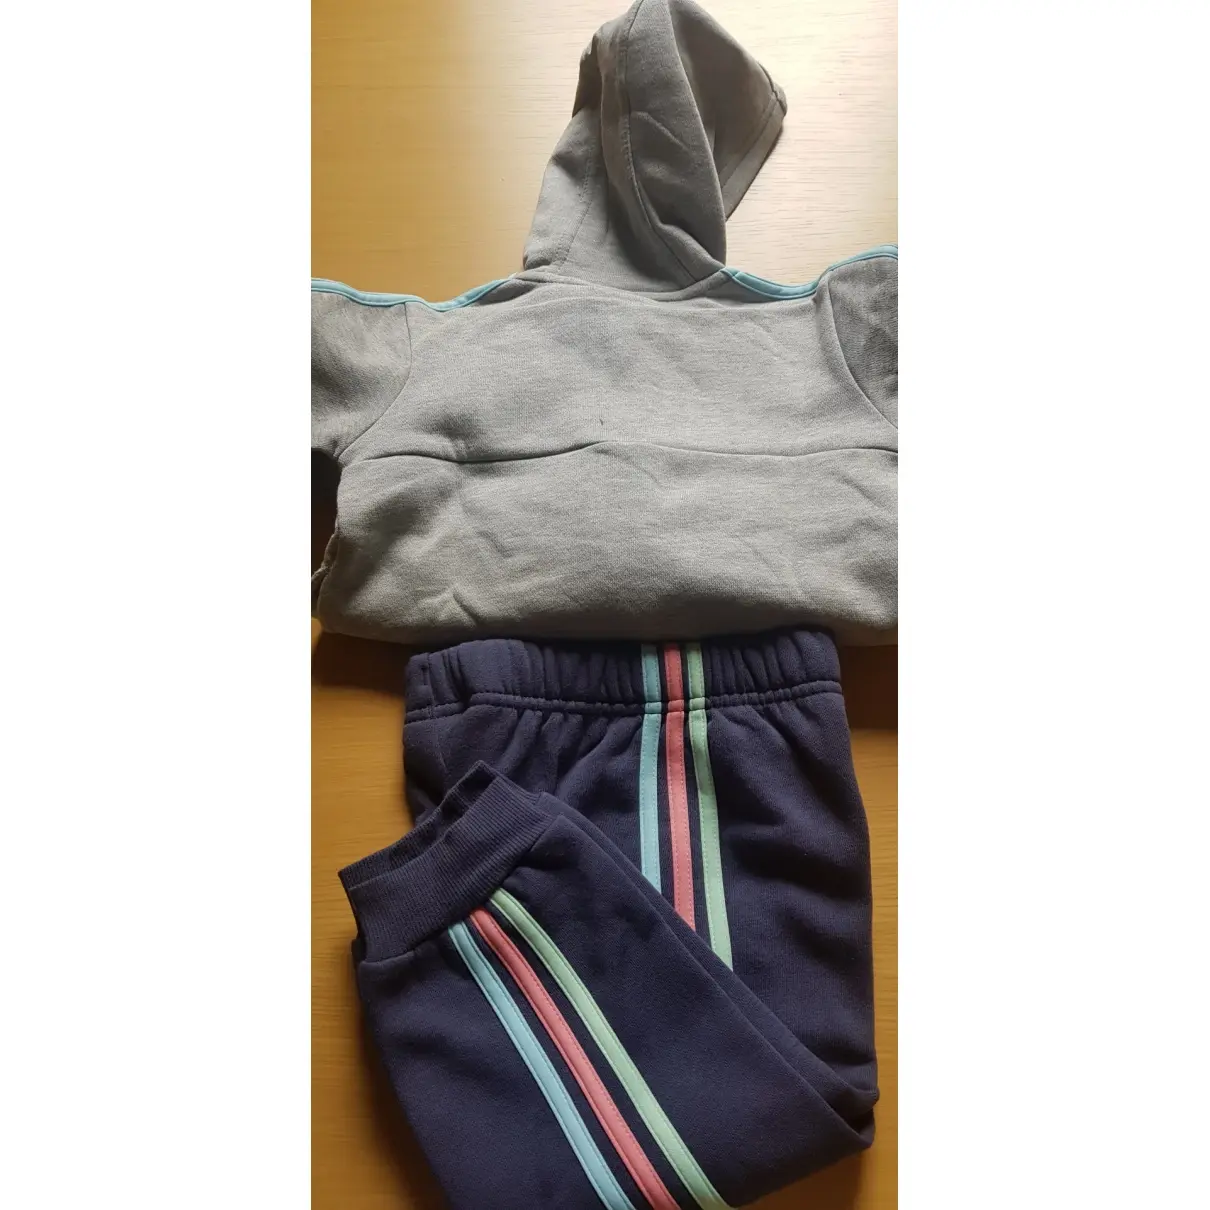 Adidas Outfit for sale